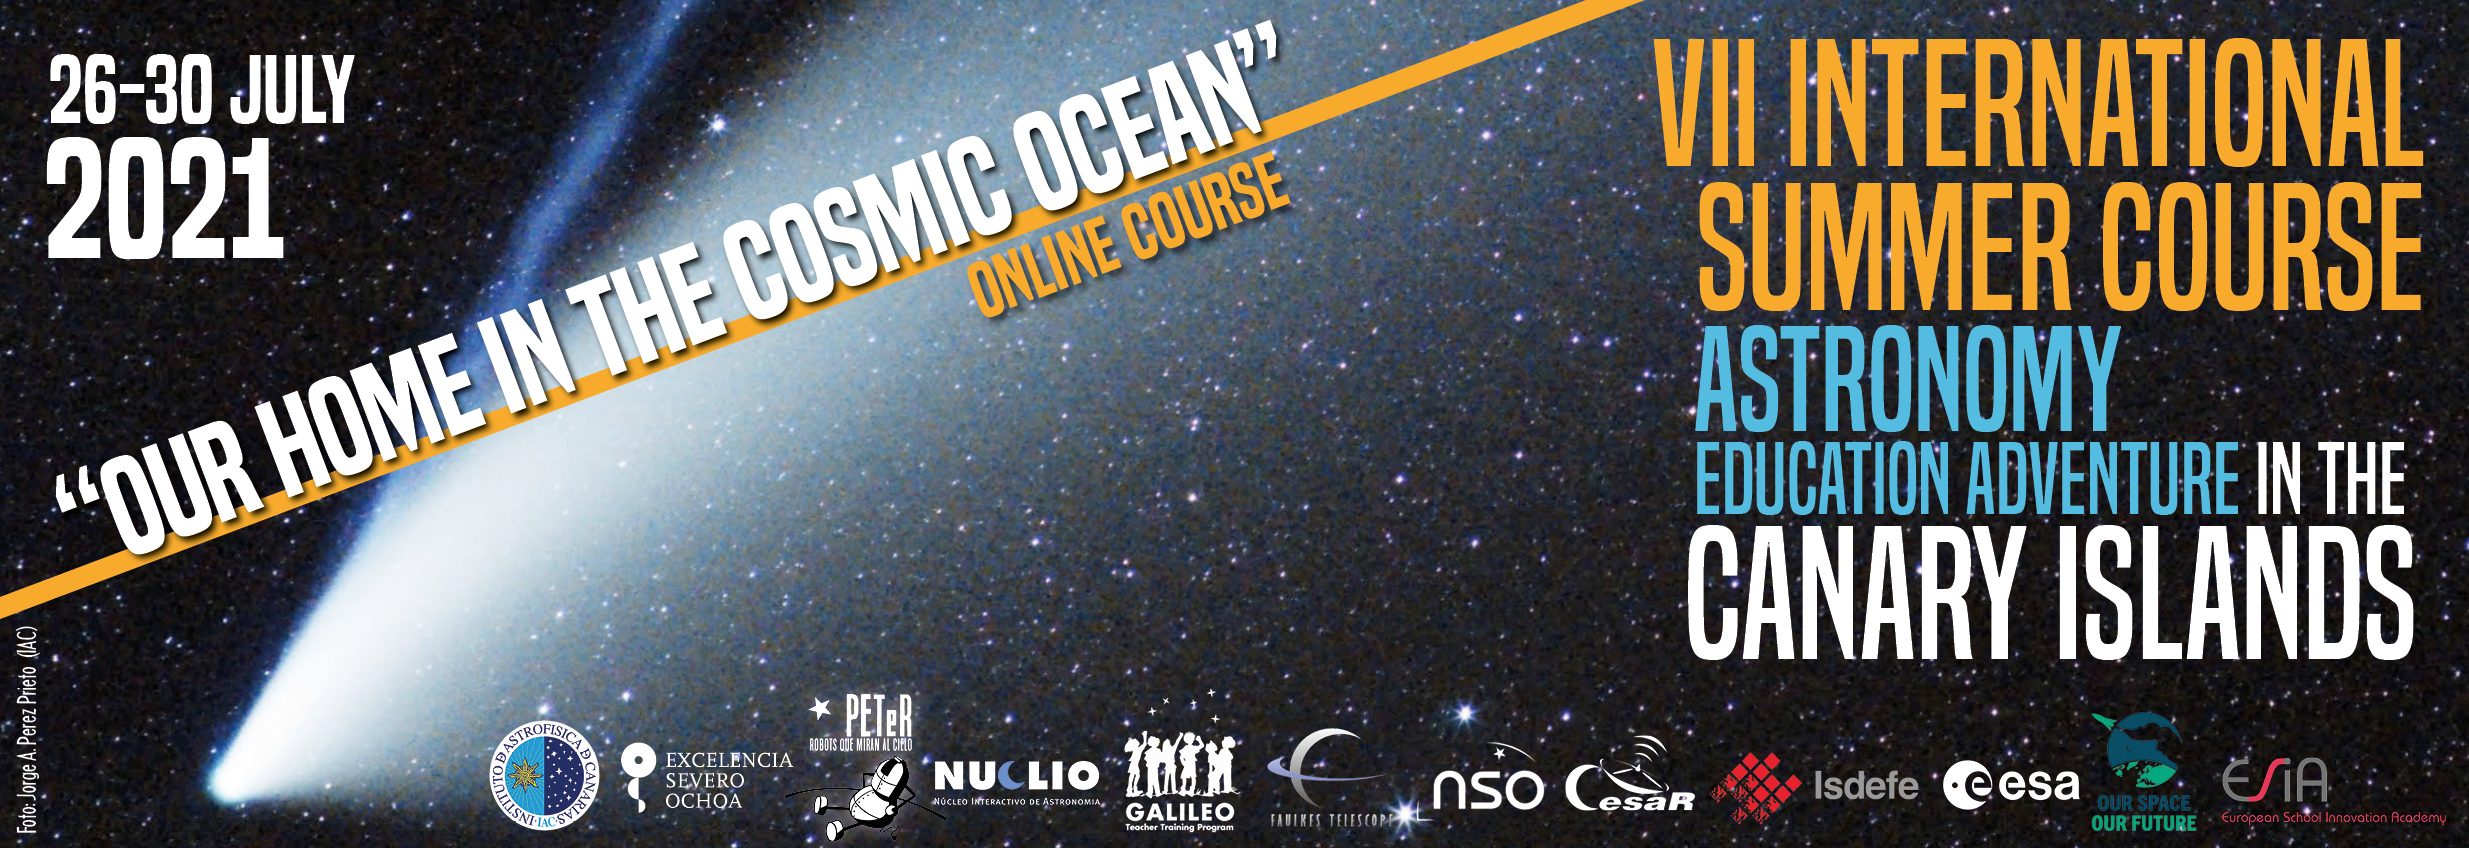 Astronomy Education Adventure in the Canary Islands 2021 (Online Course)